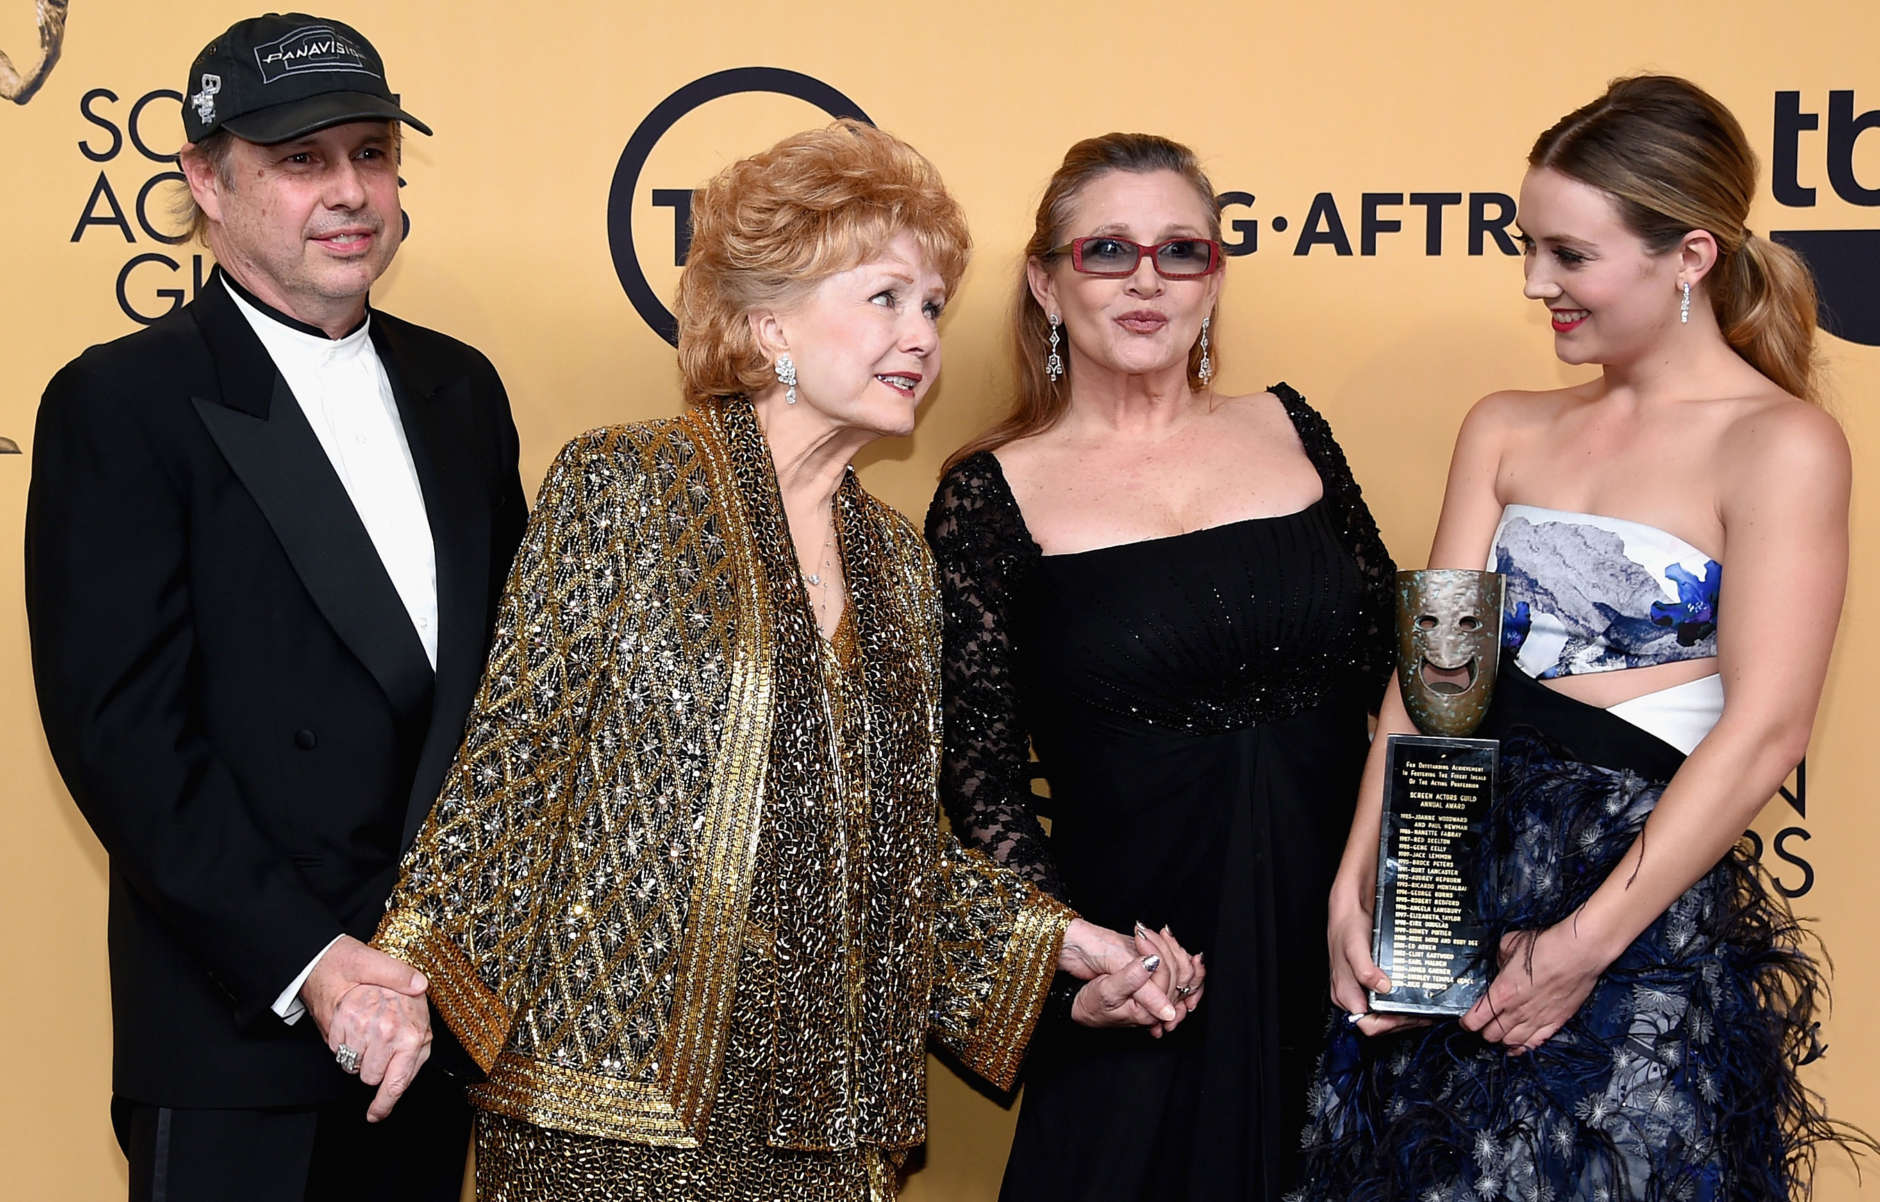 Todd Fisher, actress Debbie Reynolds, recipient of the Screen Actors Guild Life Achievement Award, actresses Carrie Fisher and Billie Lourd pose in the press room at the 21st Annual Screen Actors Guild Awards at The Shrine Auditorium on January 25, 2015 in Los Angeles, California. (Photo by Ethan Miller/Getty Images)